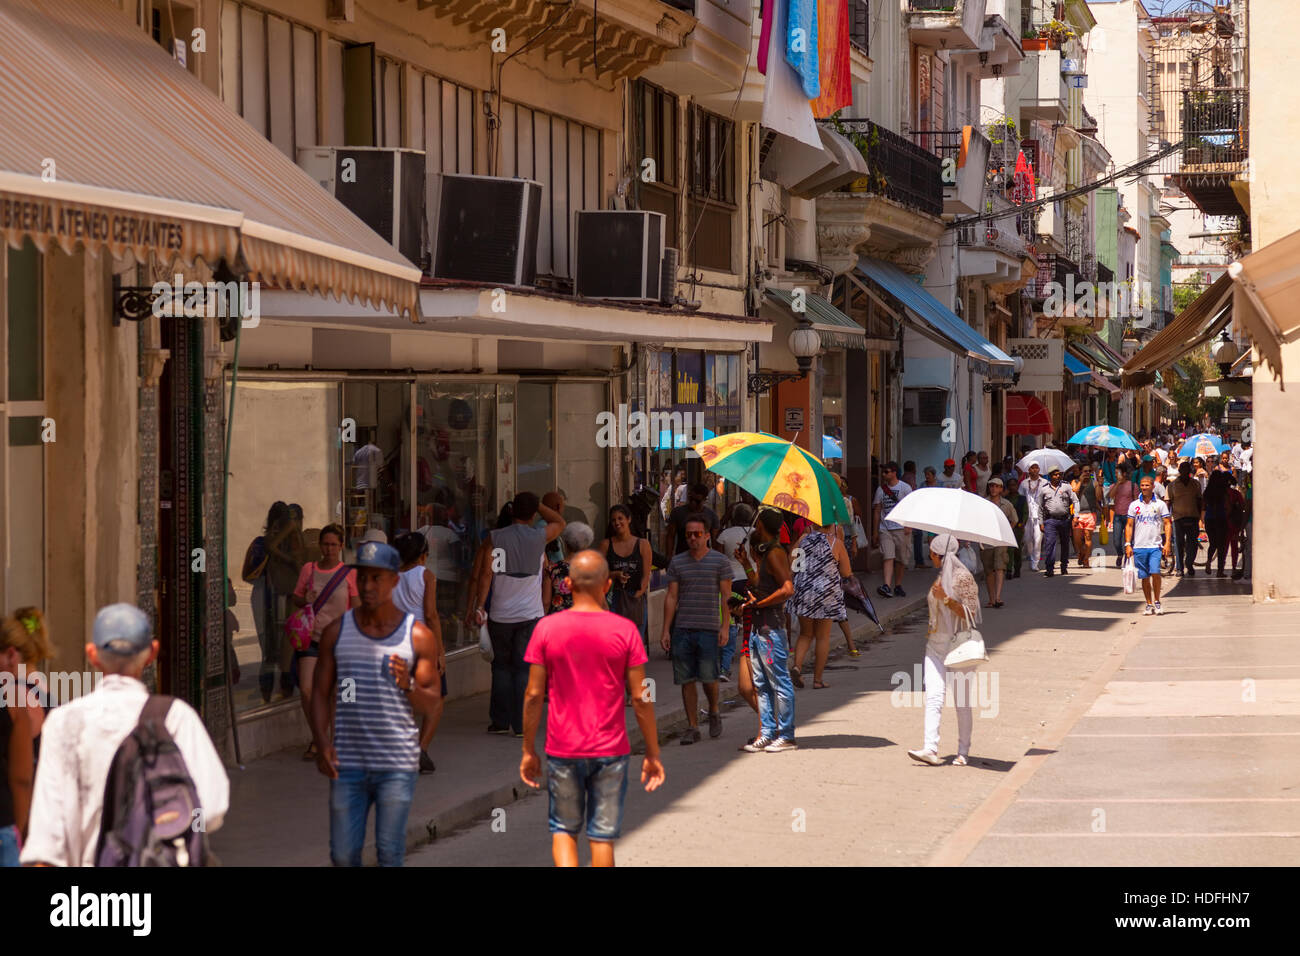 A busy street filled with Cubans (locals) in Central Havana, Cuba. Stock Photo